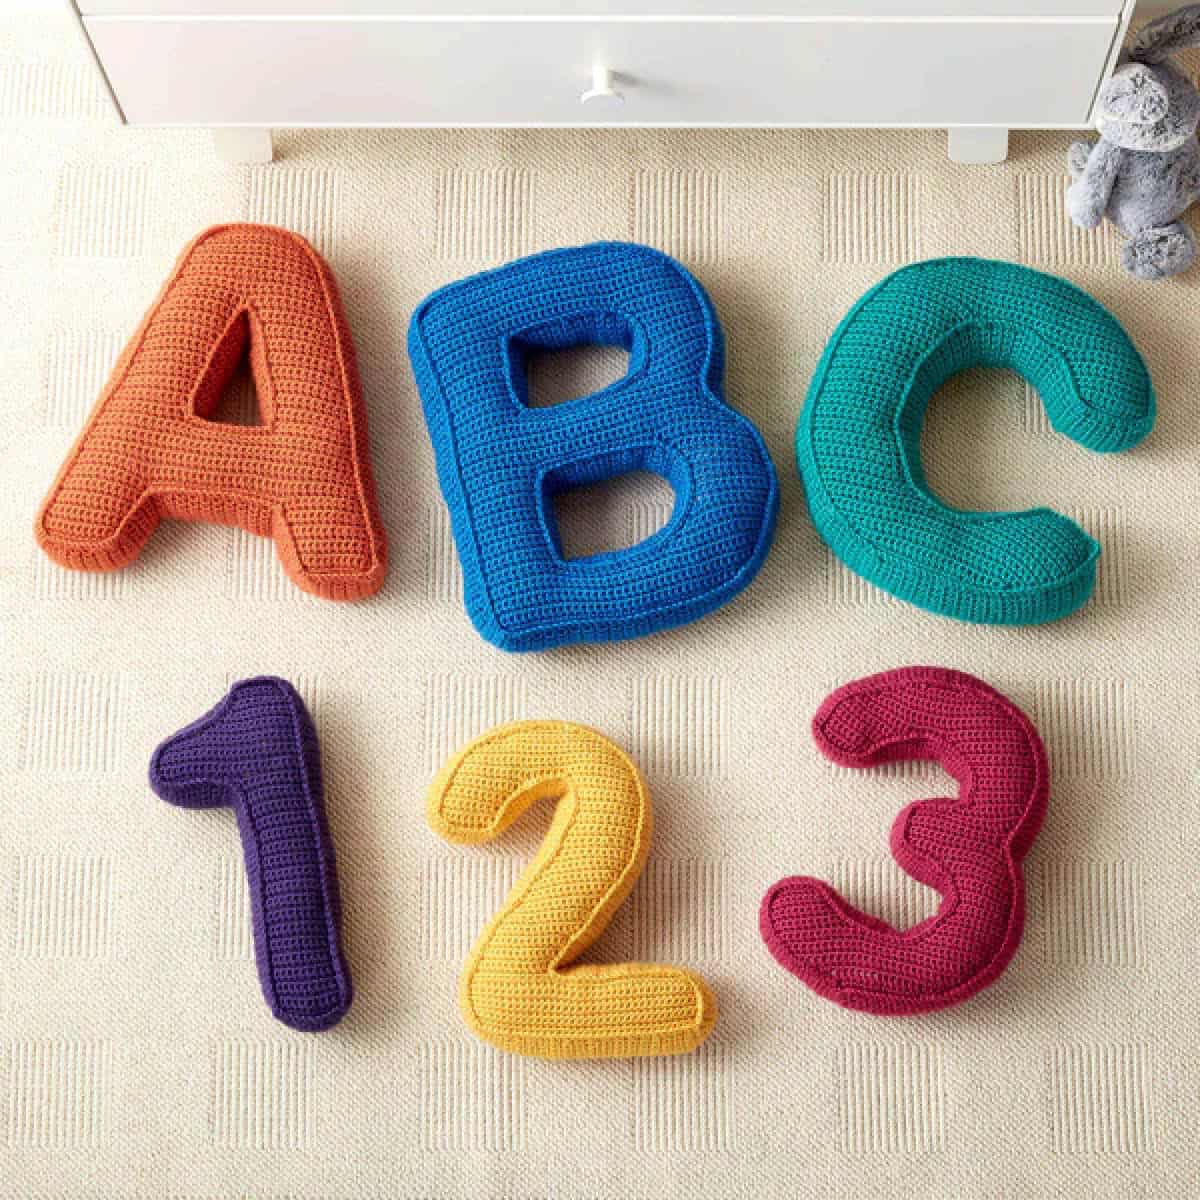 Crochet Letters and Number Pillow Patterns